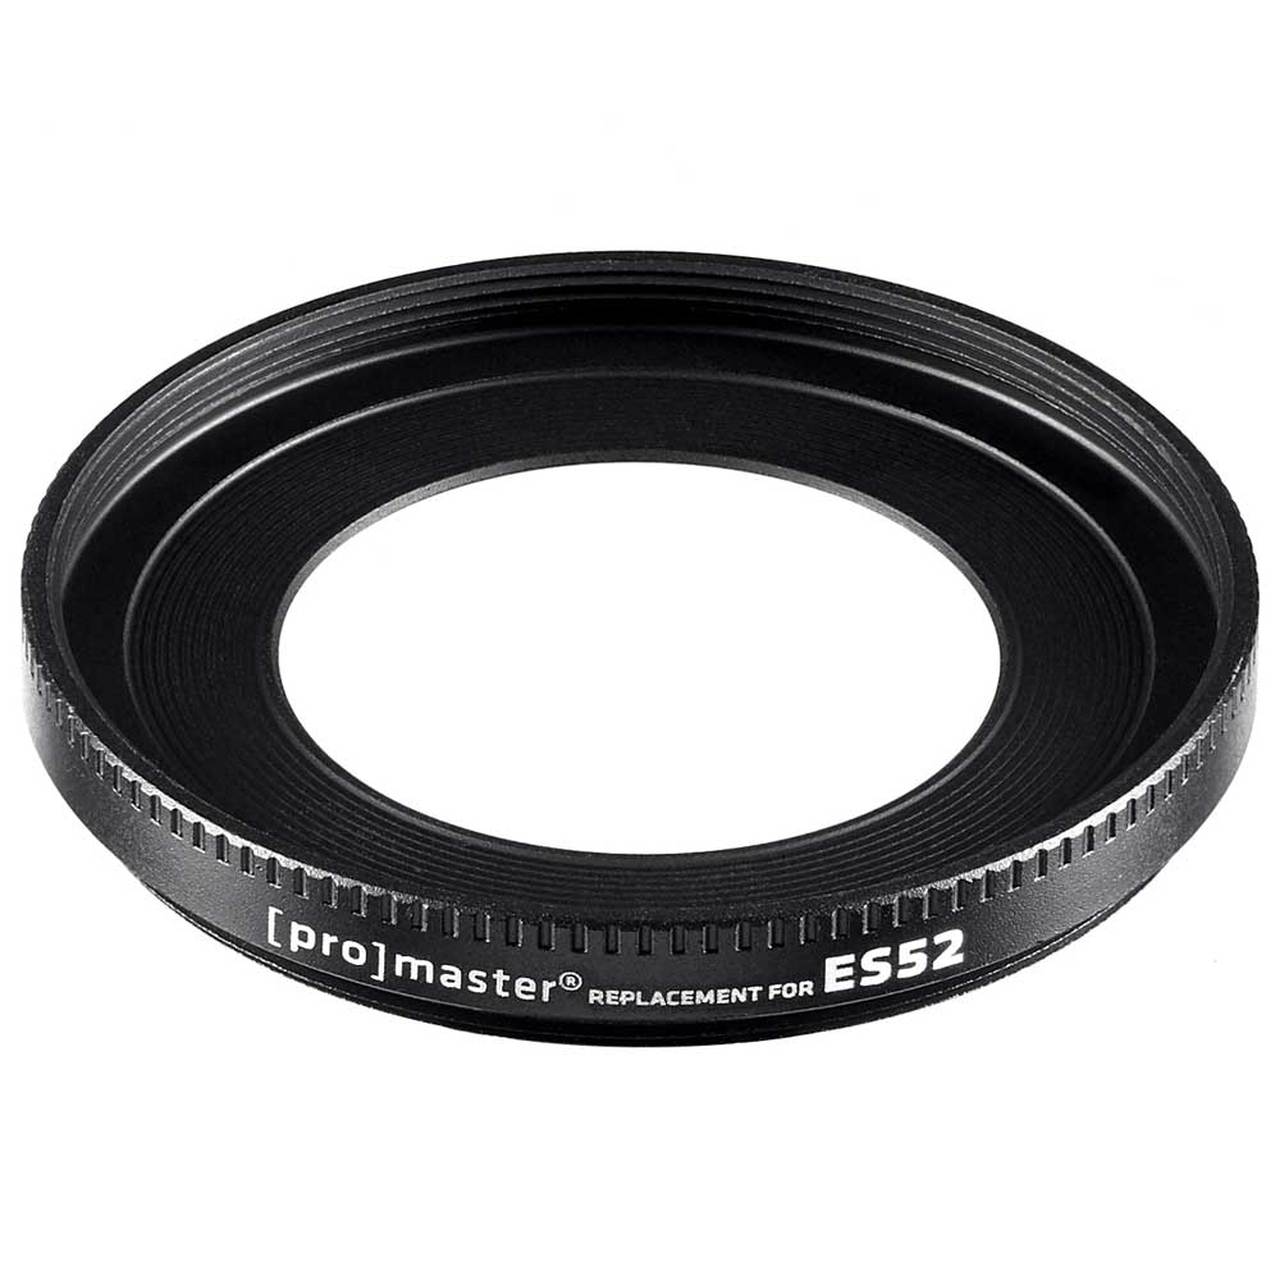 Promaster 9008 ES52 Hood for Canon